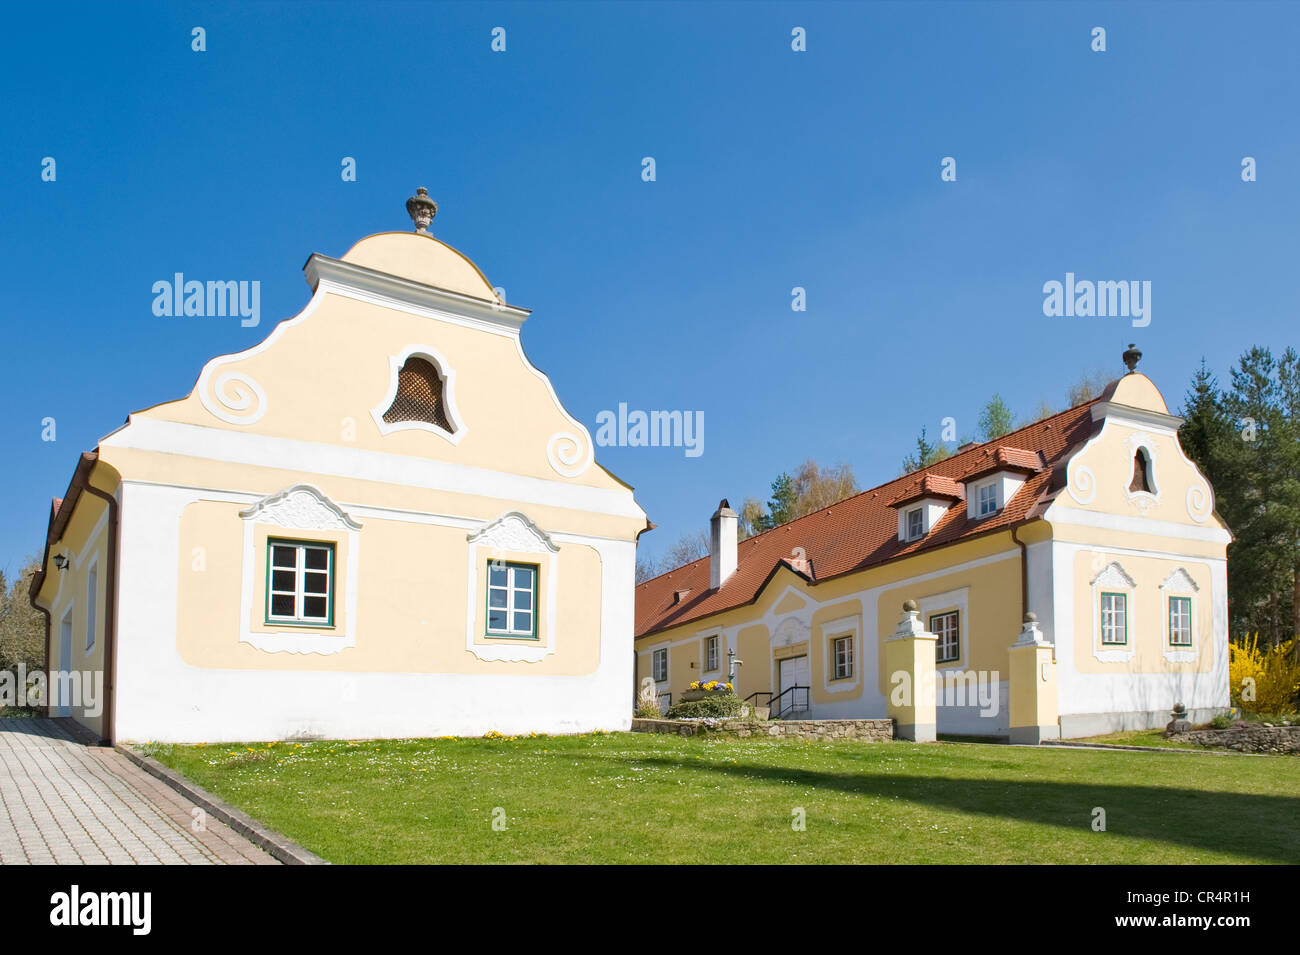 Old vicarage in a Rococo style, Krumbach, Bucklige Welt, Lower Austria, Austria, Europe Stock Photo